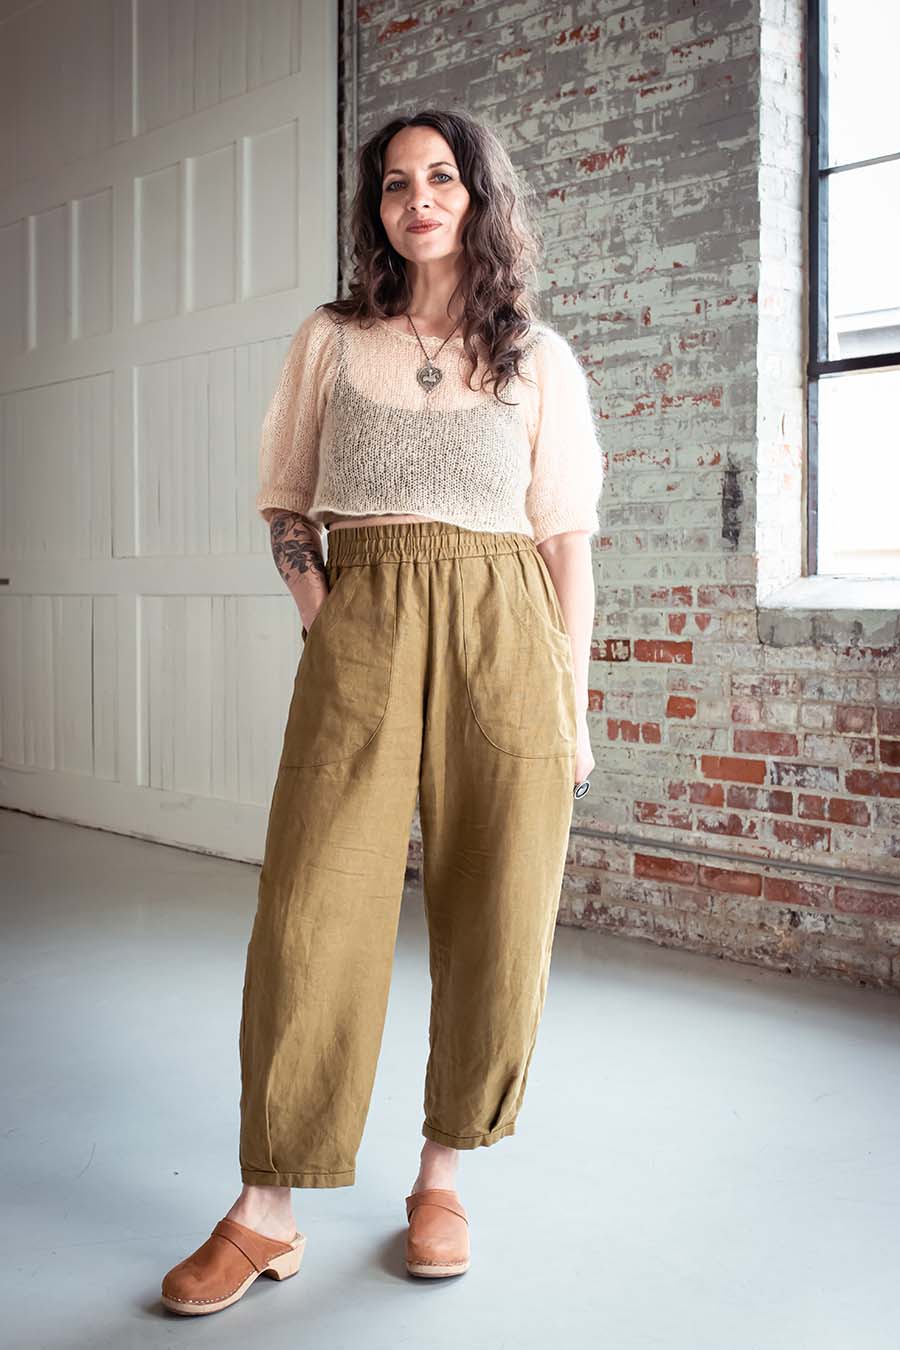 Women wearing the Chanterelle Pants sewing pattern from Sew Liberated on The Fold Line. A trouser pattern made in chambray, viscose-linen, sandwashed linen or cotton, ikat, or light twill fabrics, featuring an elasticated waist, front and back patch pocke